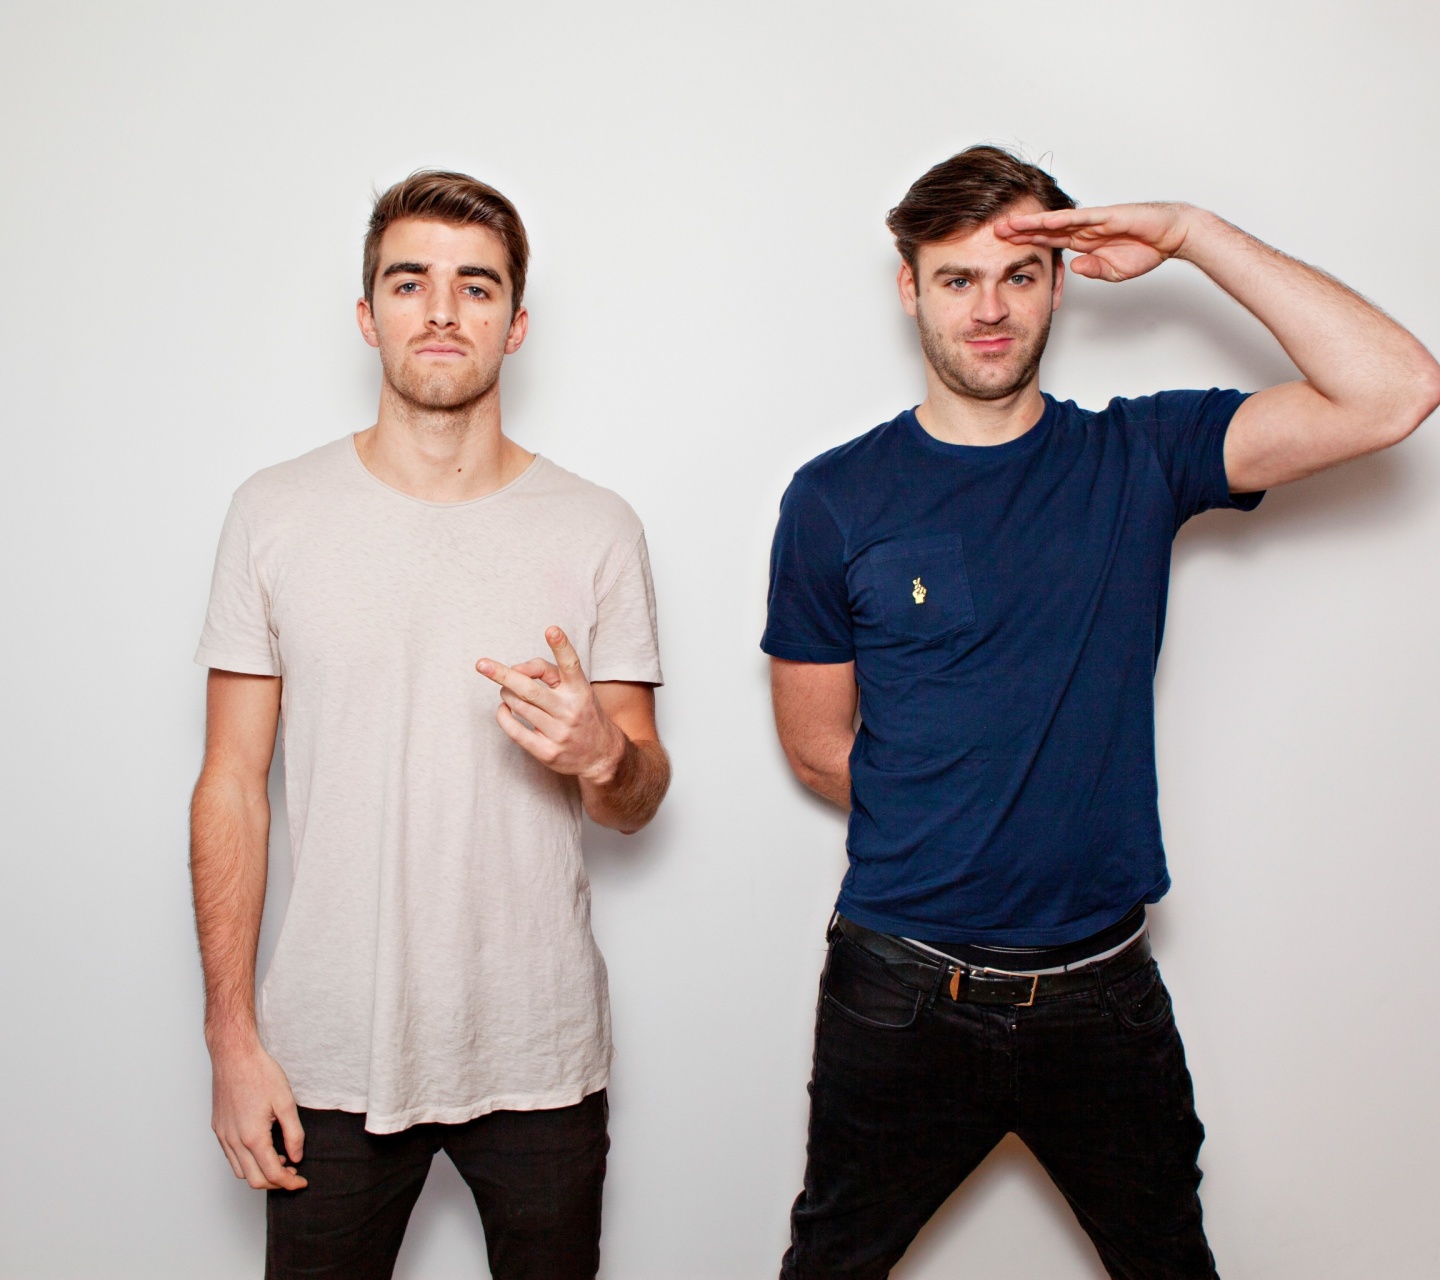 The Chainsmokers with Andrew Taggart and Alex Pall wallpaper 1440x1280